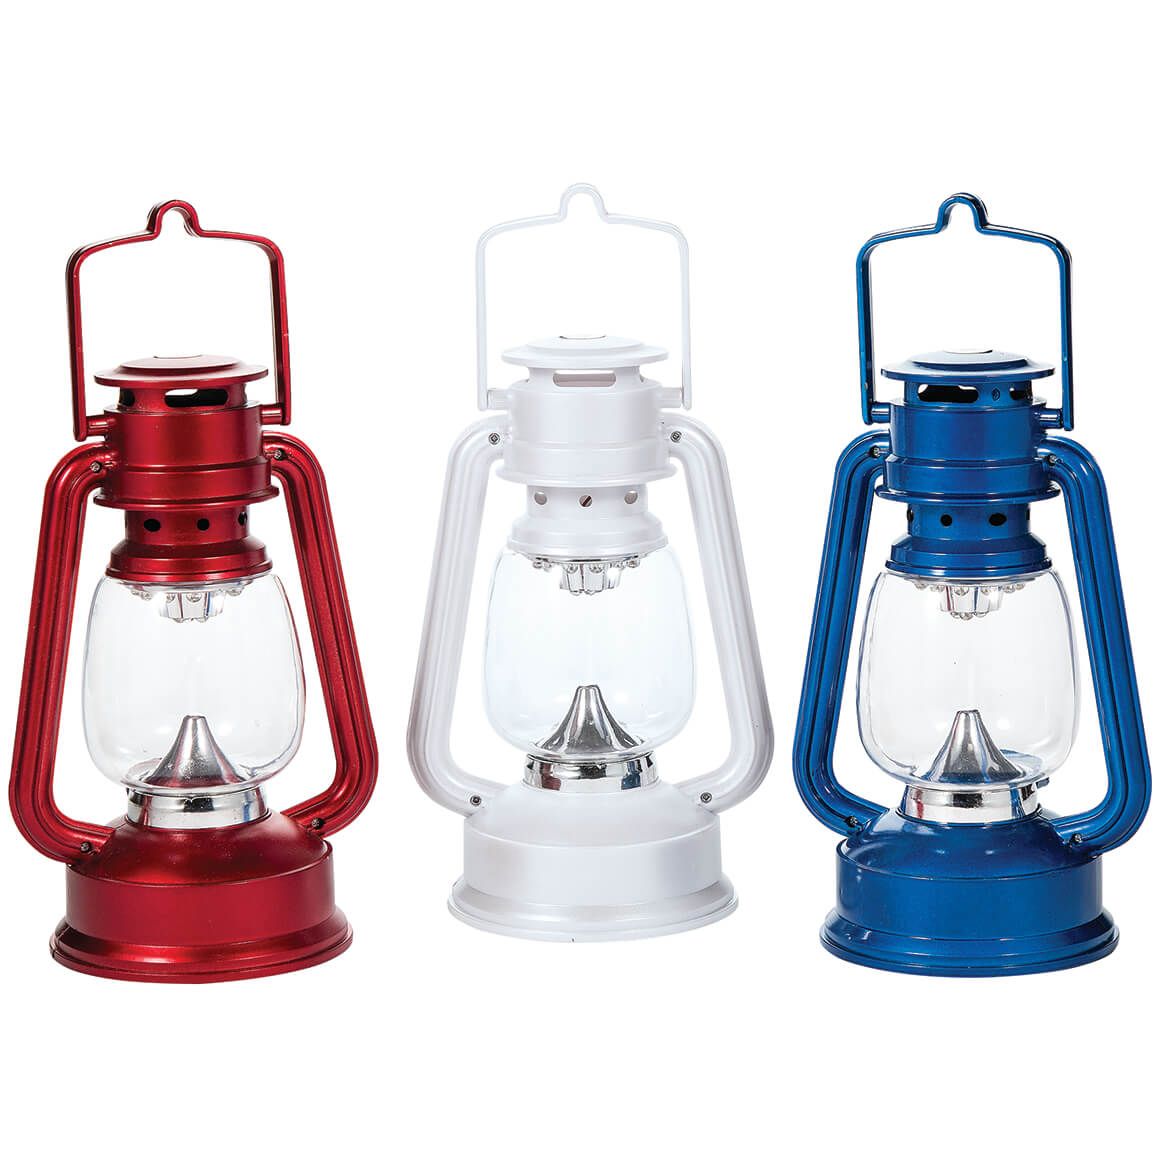 Red, White and Blue Lanterns Set of 3 + '-' + 369431